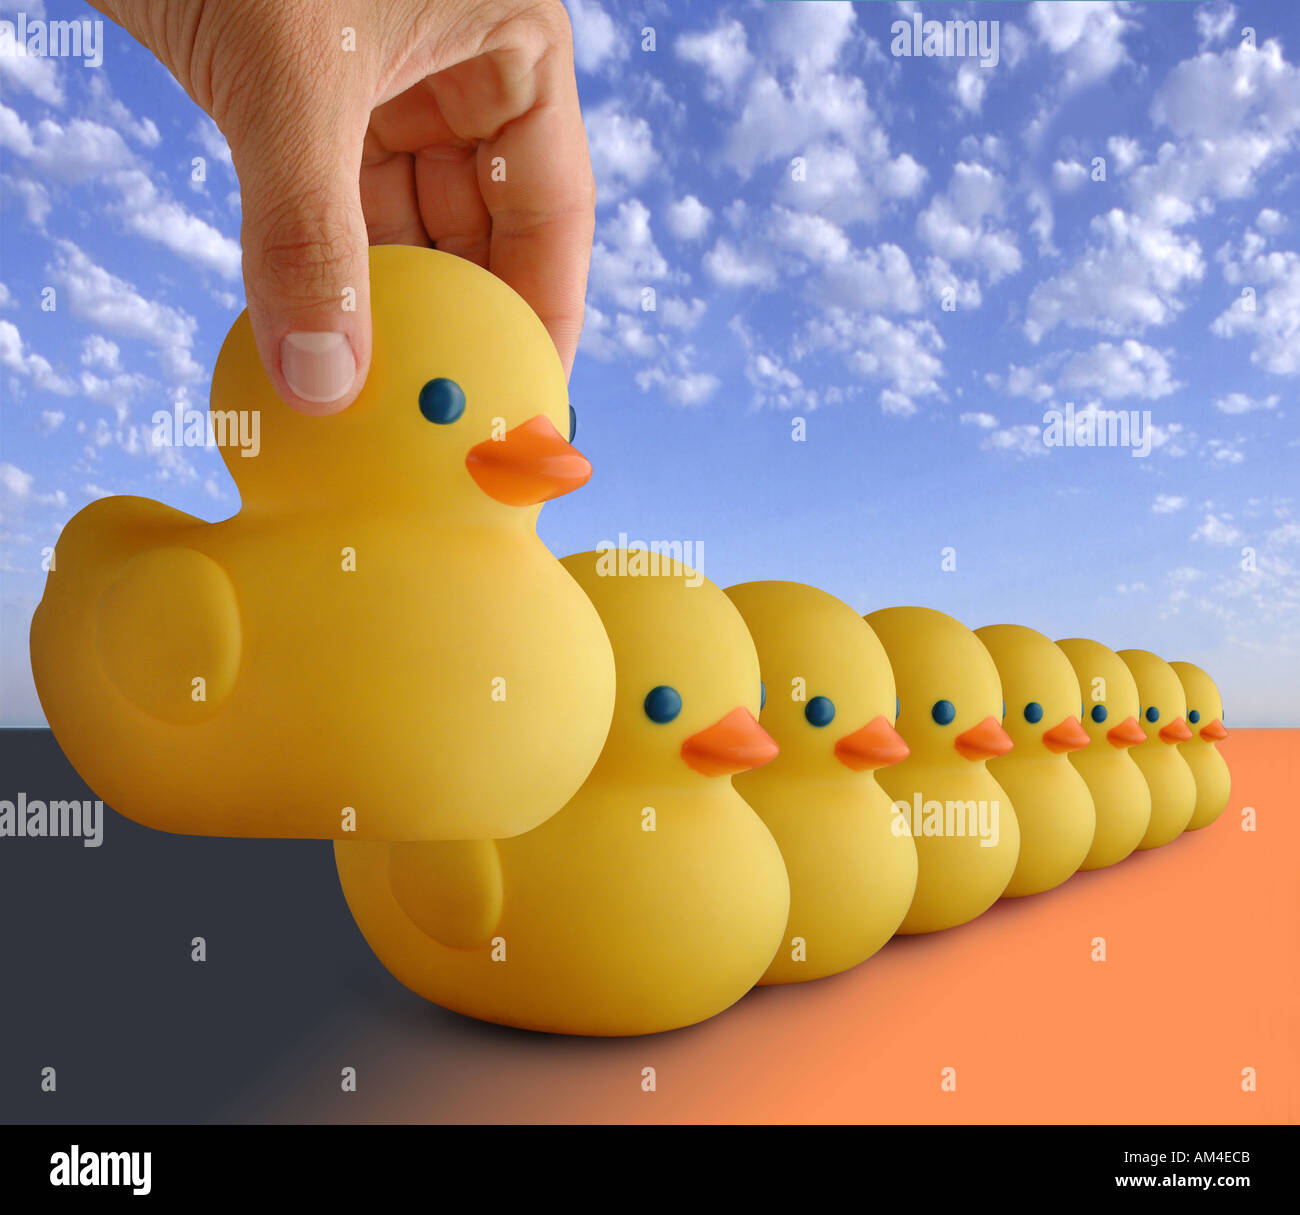 rubber toy ducks in a row Stock Photo - Alamy